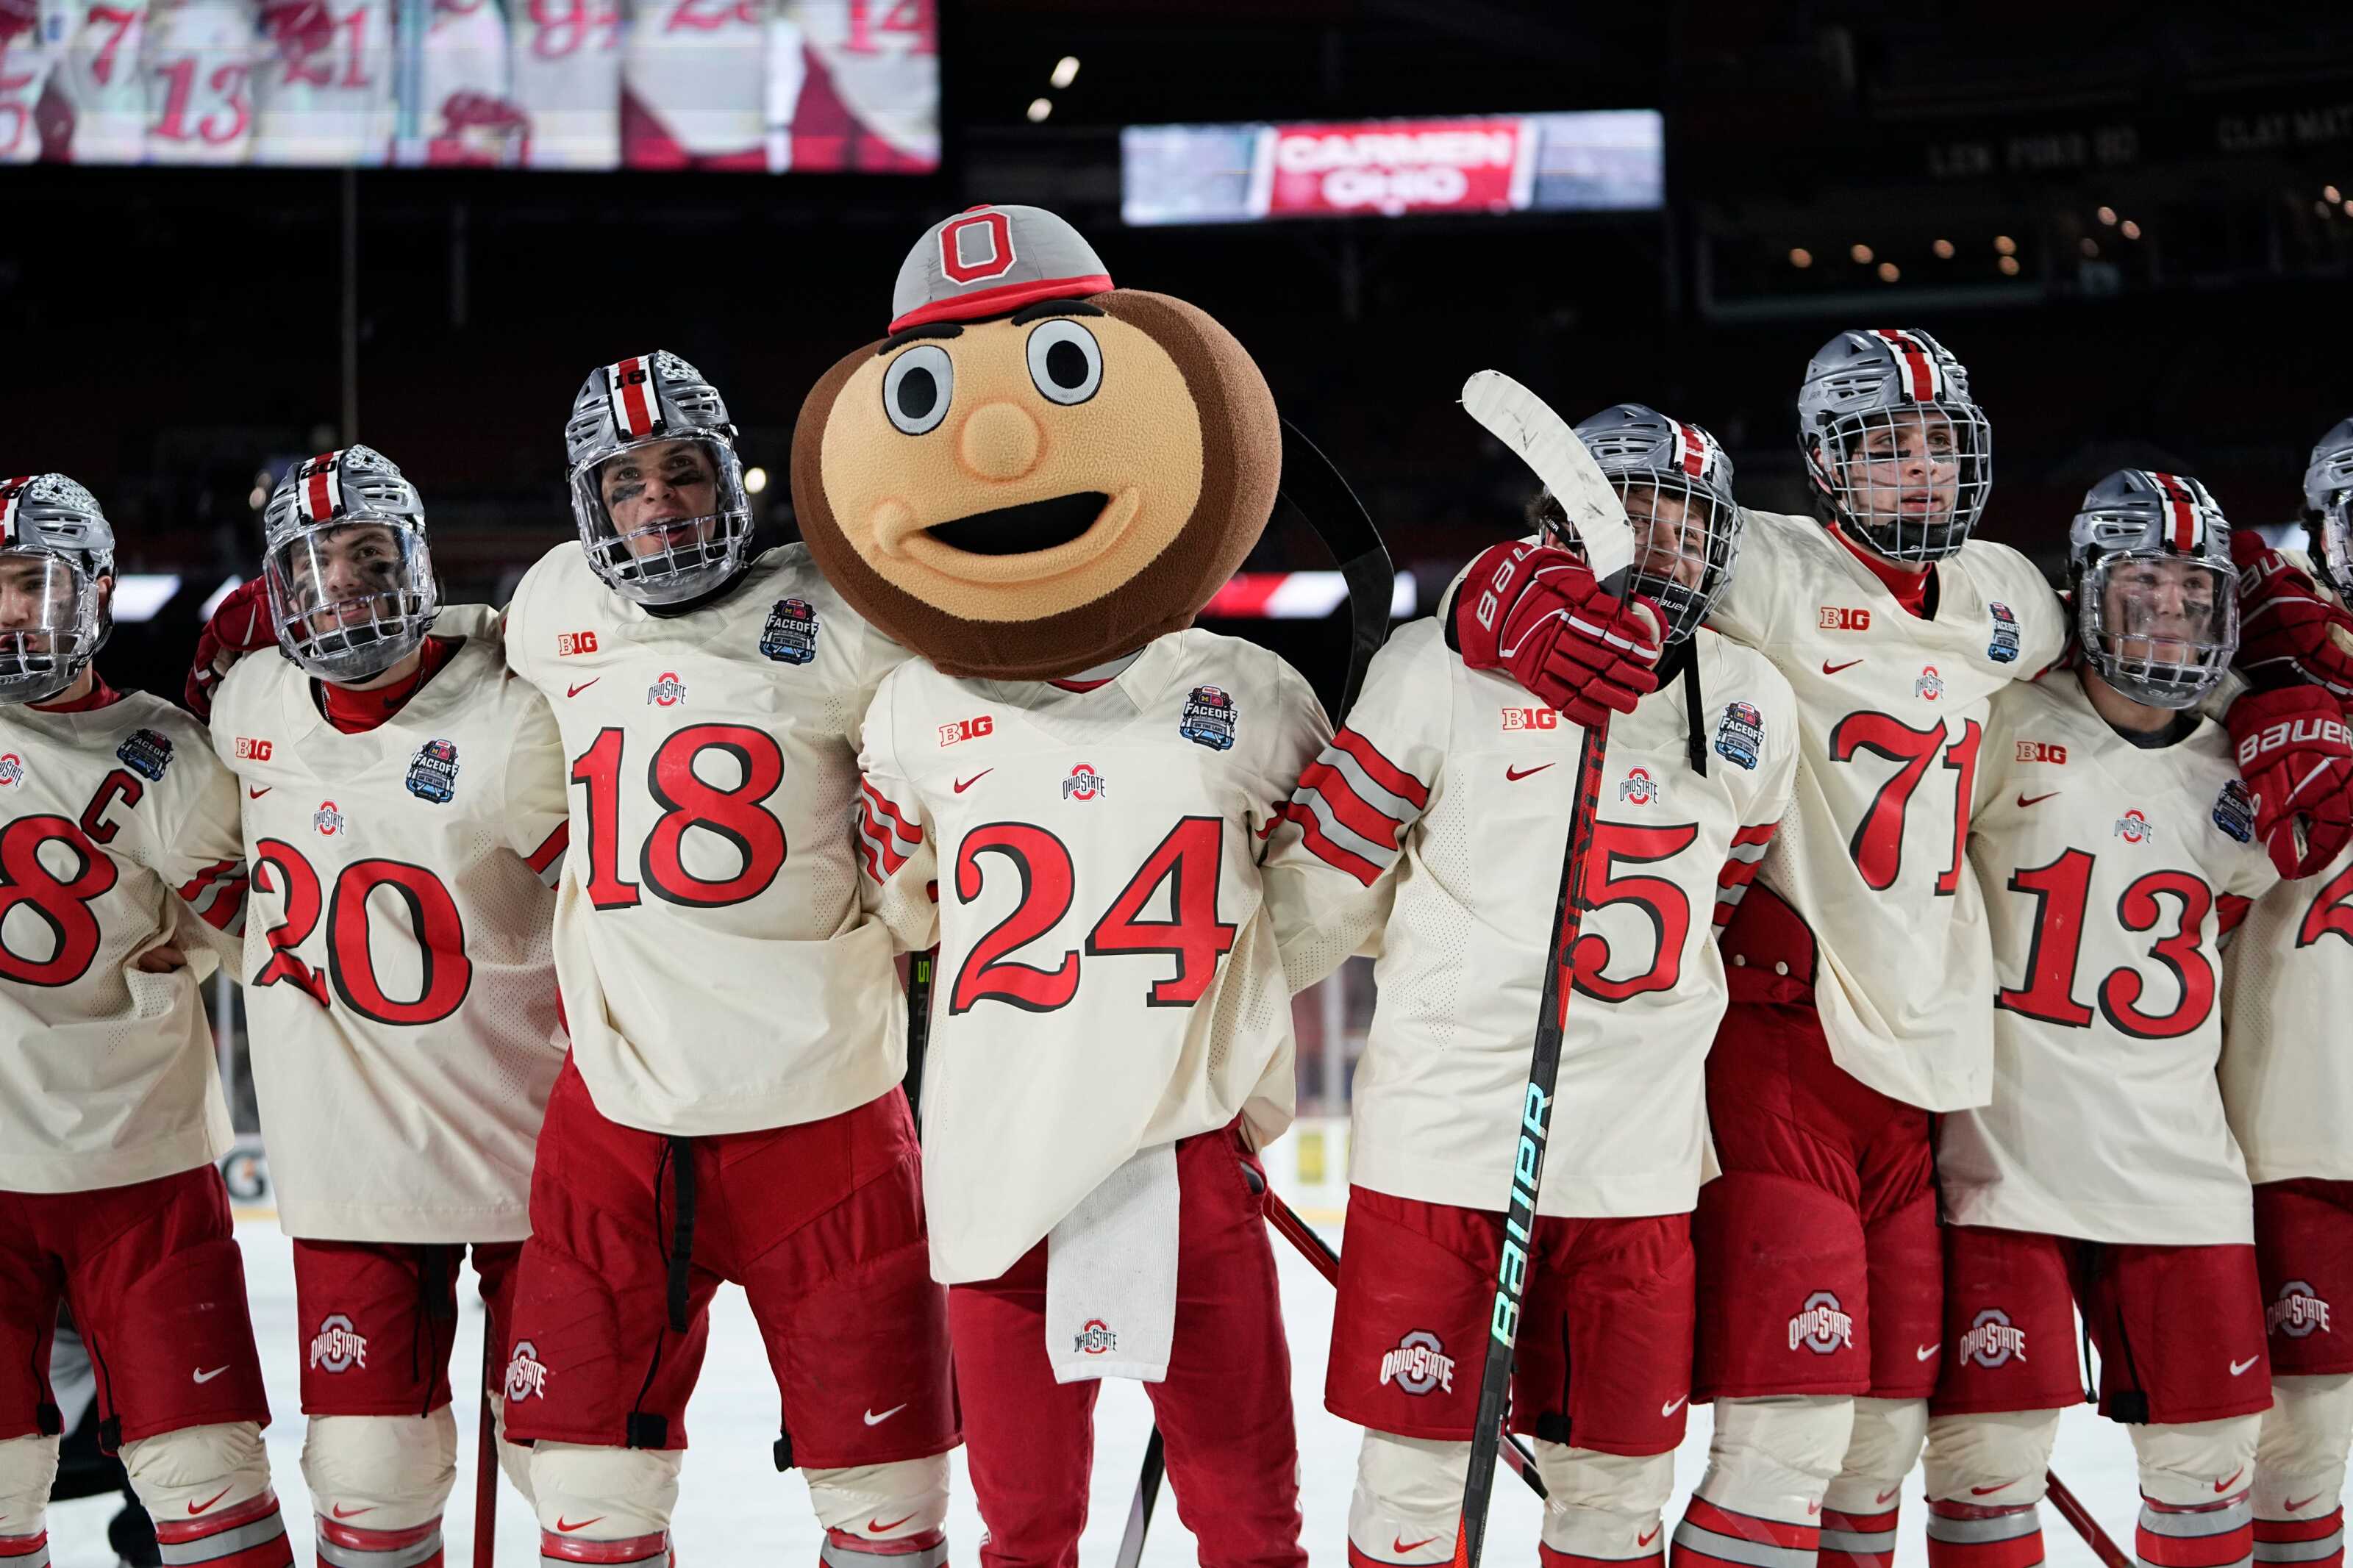 Ohio State and Michigan to faceoff in outdoor game in Cleveland